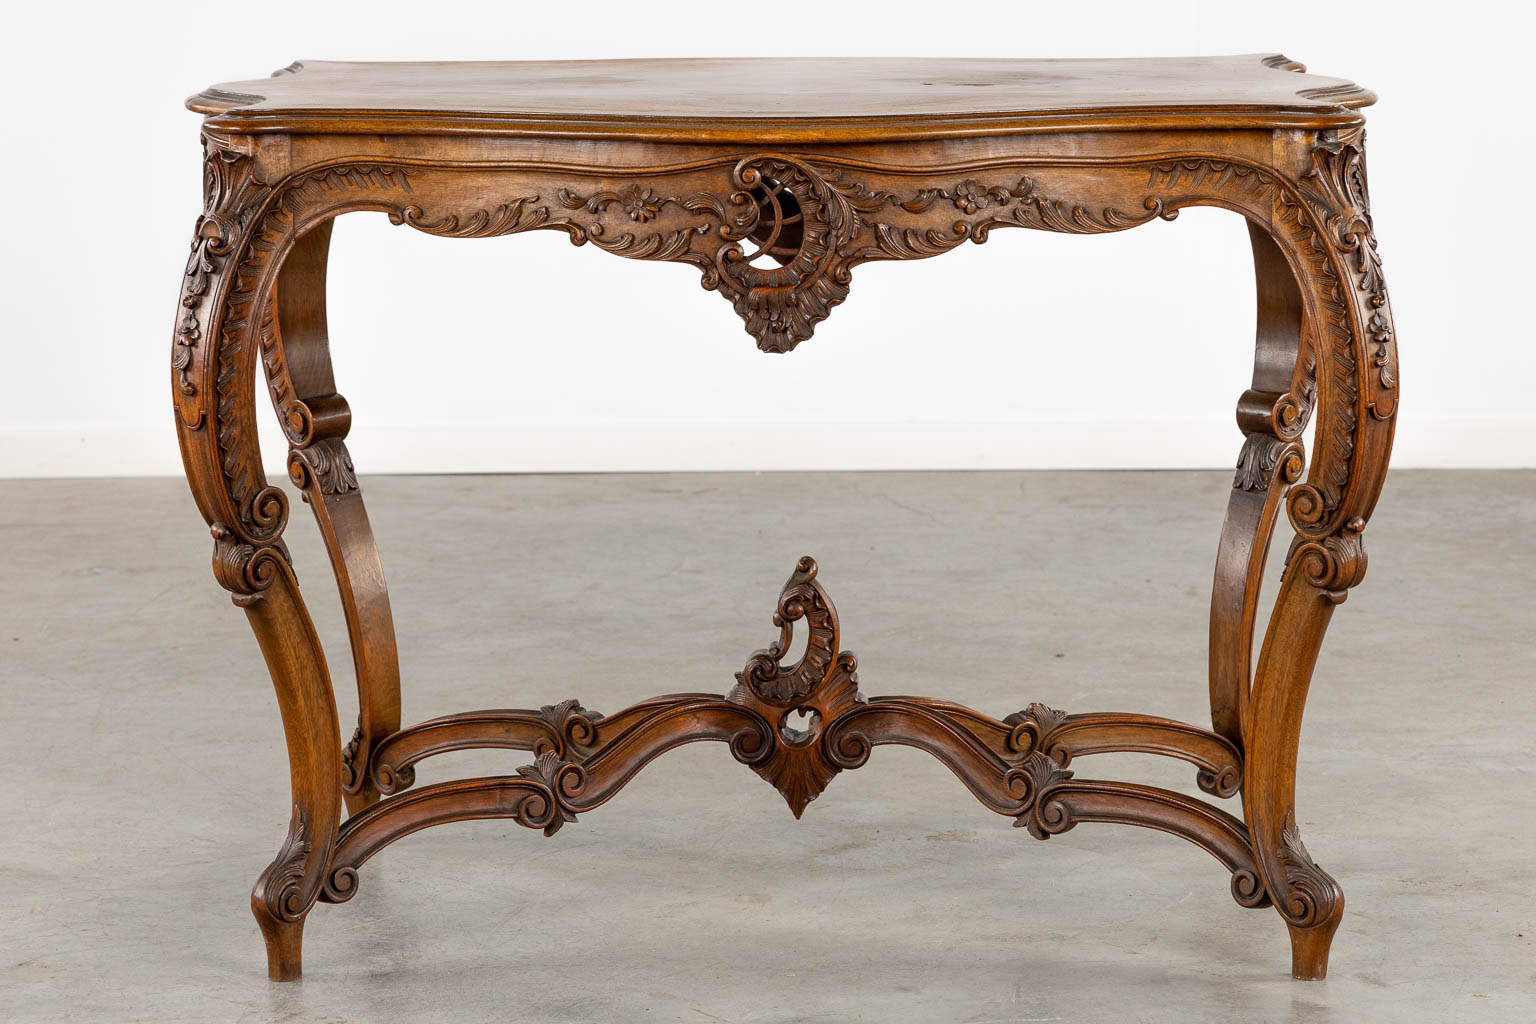 An 8-piece salon suite, sculptured wood in Louis XV style. Circa 1900. (L:67 x W:135 x H:103 cm) - Image 28 of 33